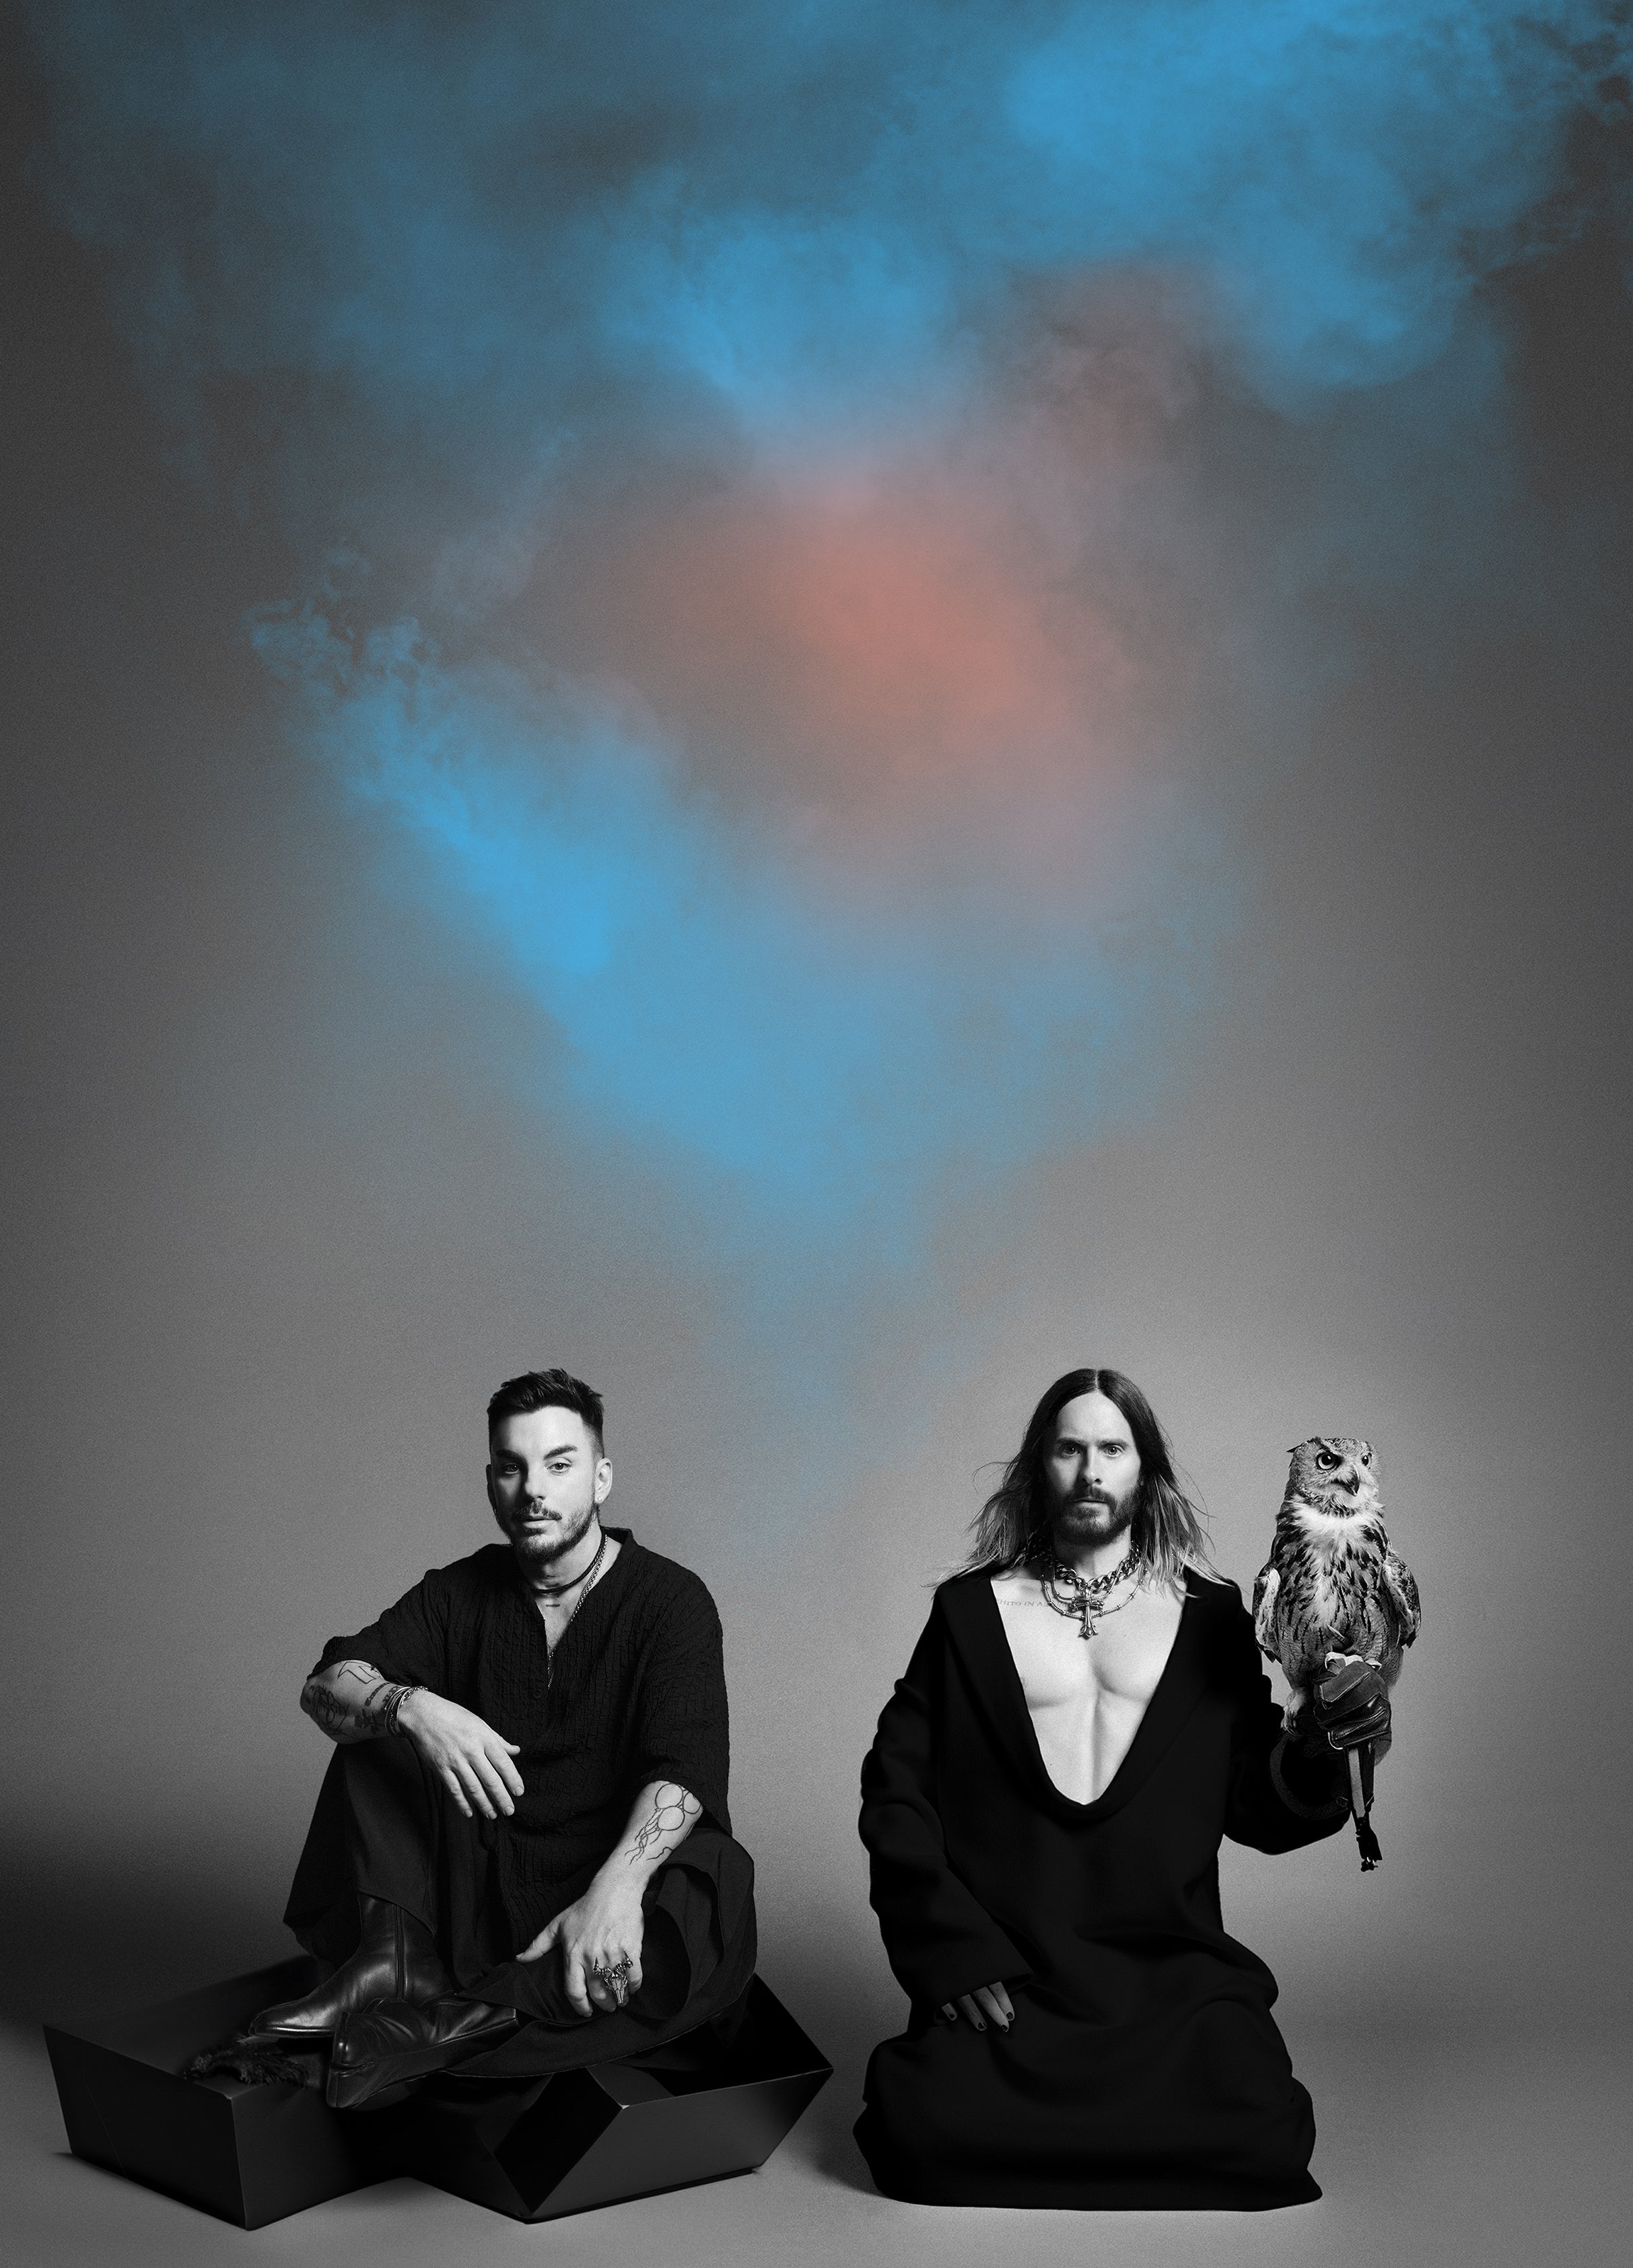 Image used with permission from Ticketmaster | THIRTY SECONDS TO MARS - SEASONS WORLD TOUR tickets